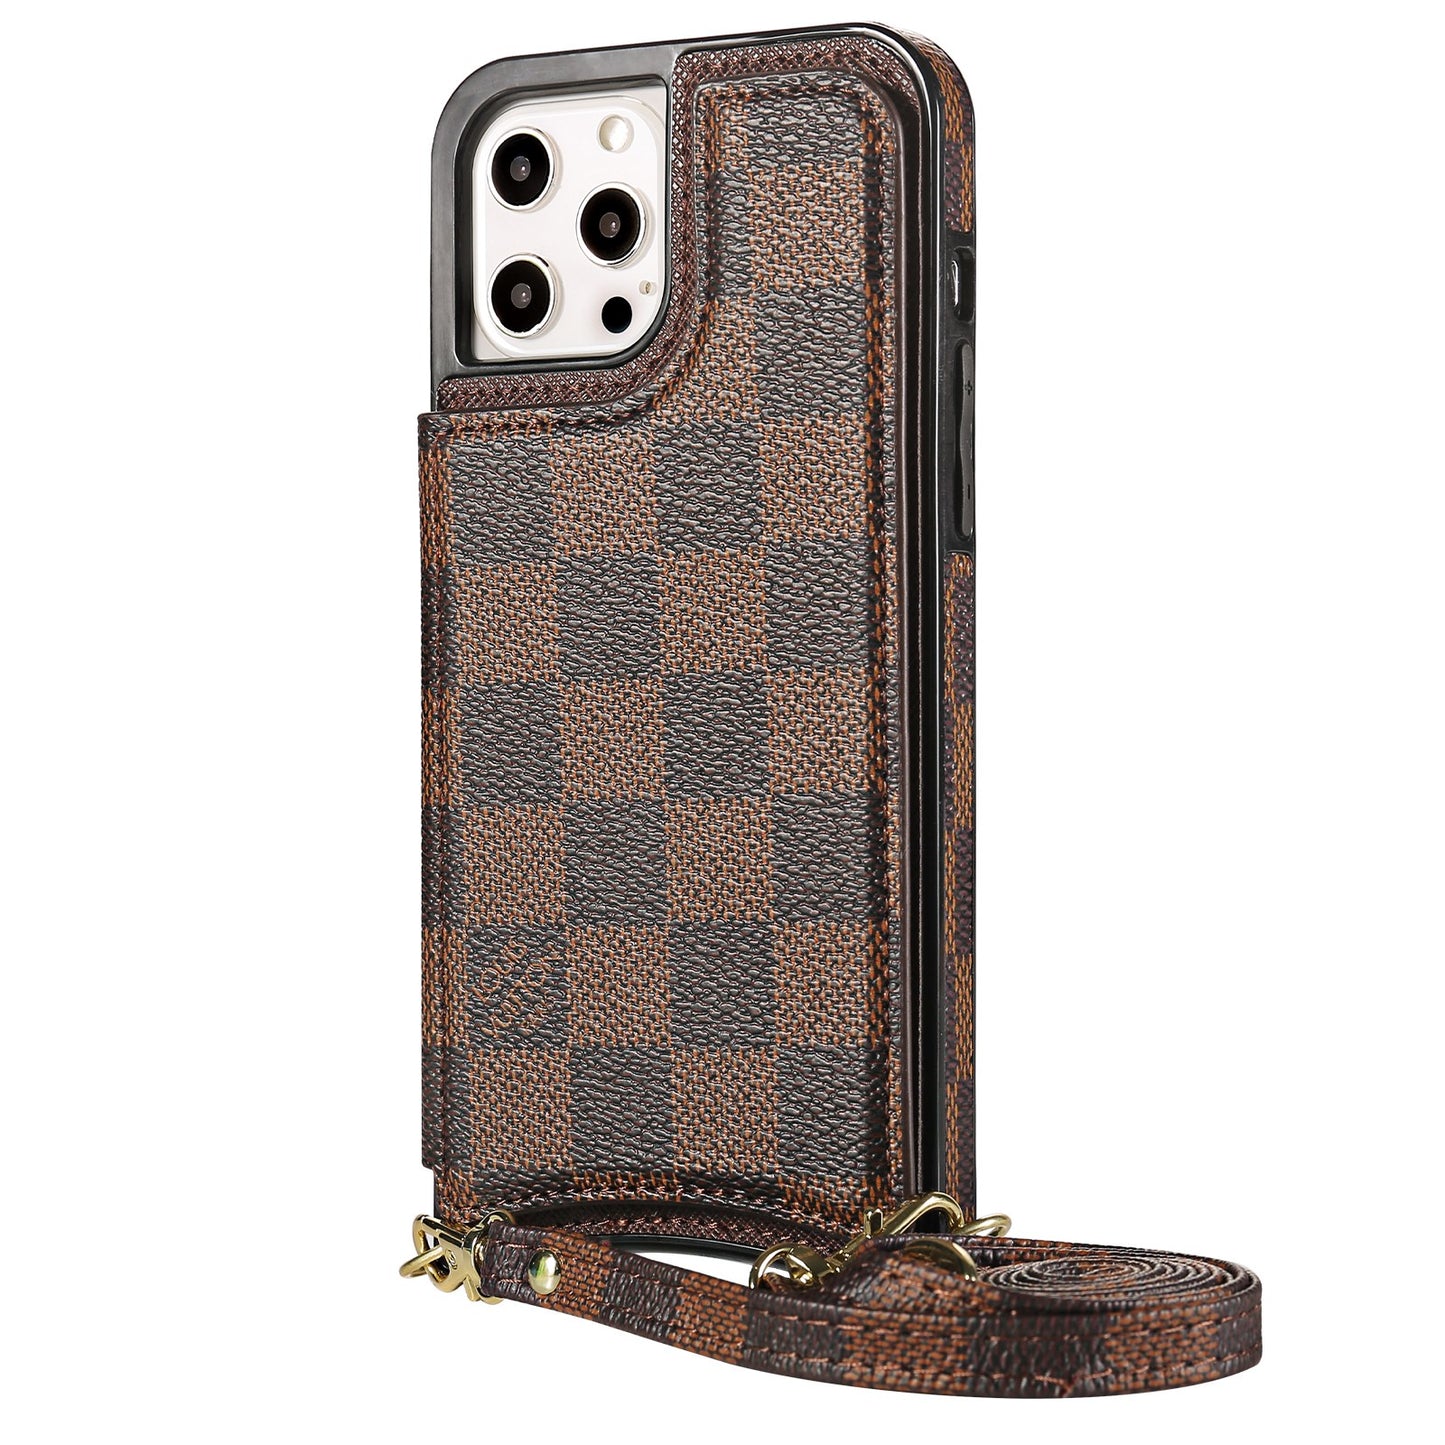 Classic Checkered x Cardholder iPhone Case